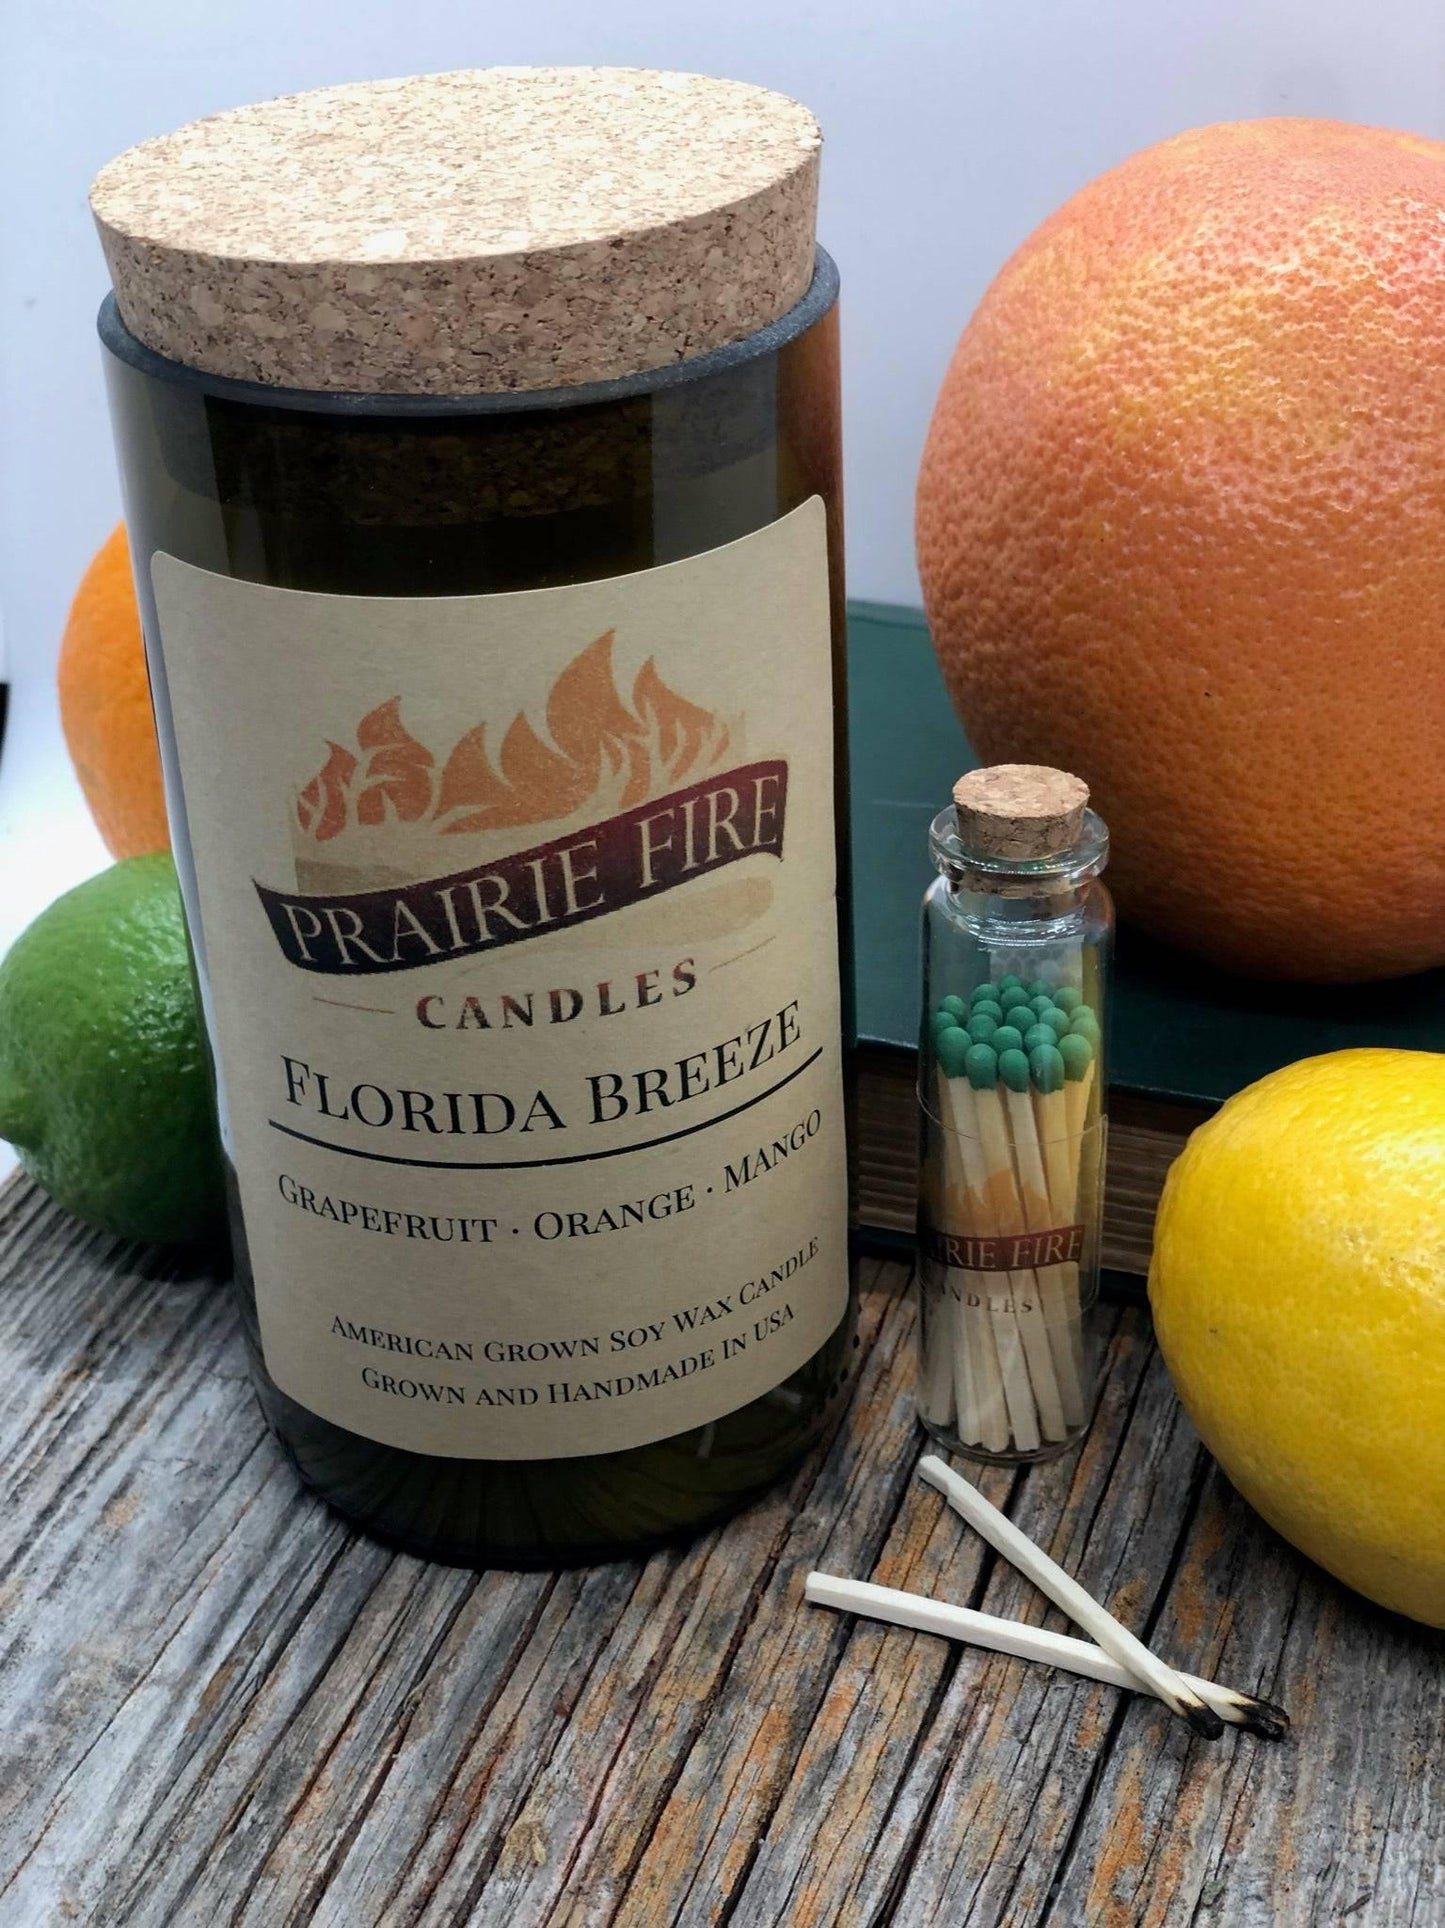 Florida Breeze Soy Wax Candle | Repurposed Wine Bottle Candle Natural Cork | Handmade in USA Candle | Eco-Friendly Candle | Non-Toxic Soy Candle - Prairie Fire Candles